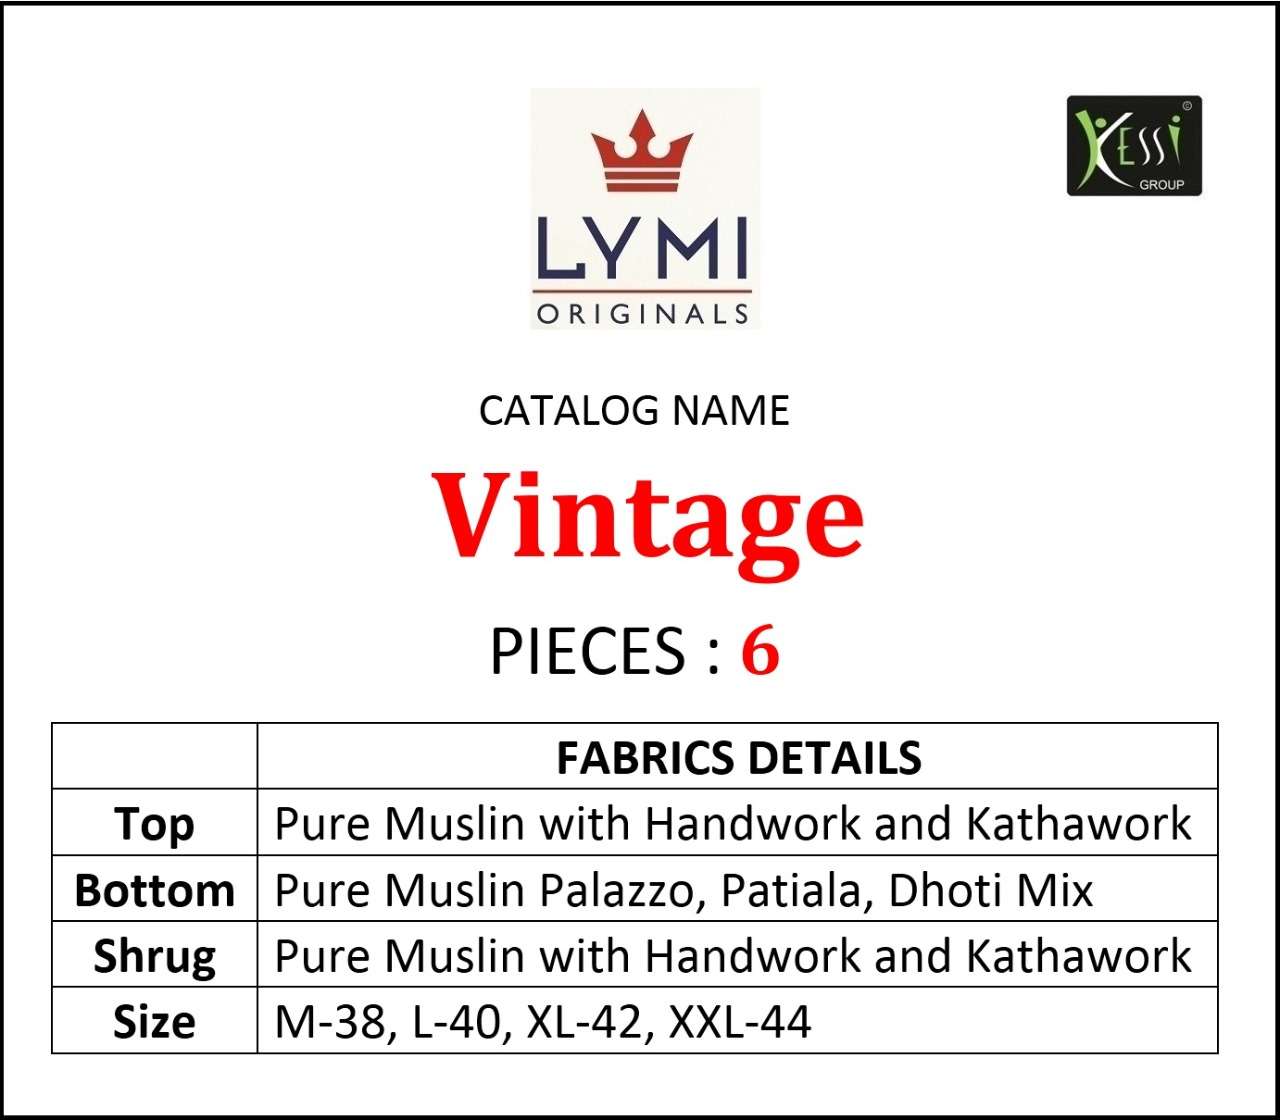 VINTAGE BY LYMI ORIGINAL 3401 TO 3406 SERIES BEAUTIFUL STYLISH FANCY COLORFUL CASUAL WEAR & ETHNIC WEAR PURE MUSLIN WITH HANDWORK KURTIS WITH BOTTOM AT WHOLESALE PRICE